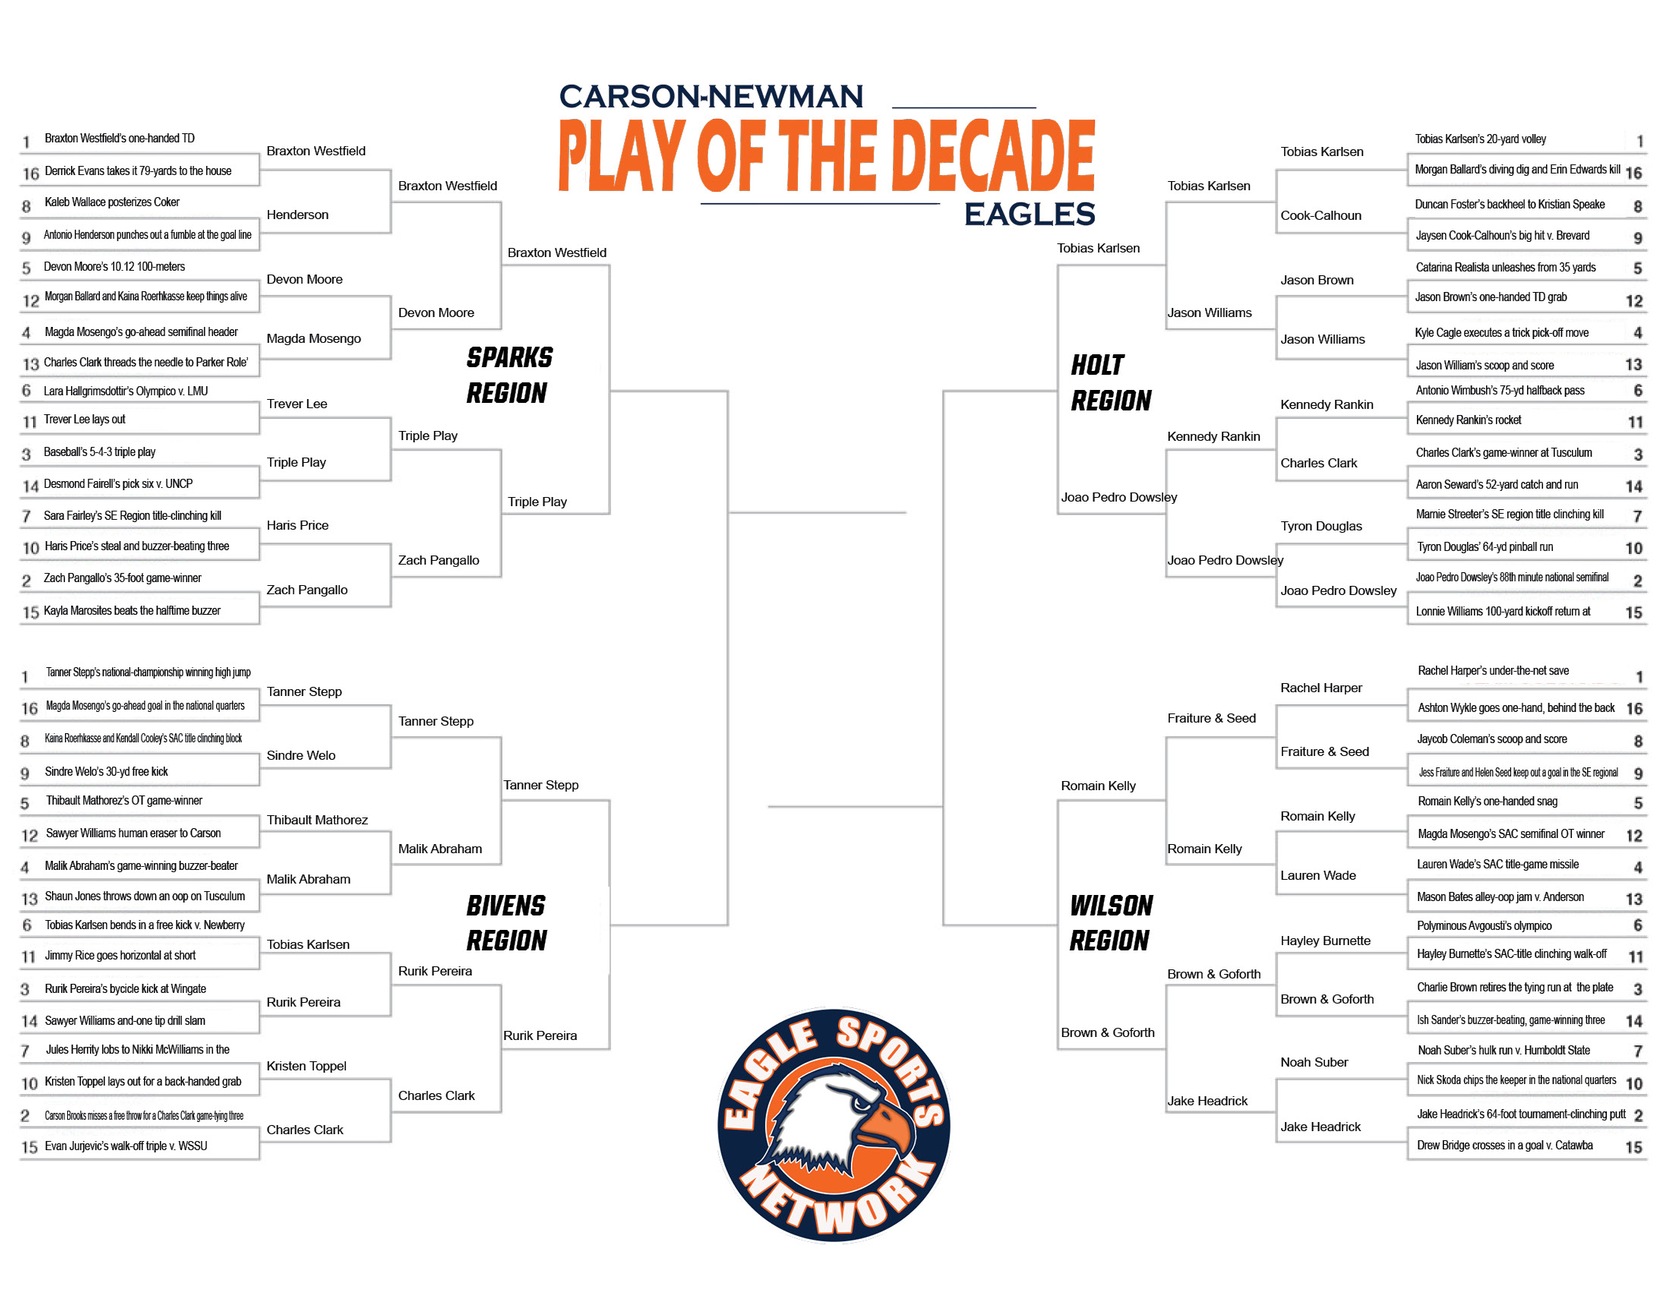 Elite Eight set for Carson-Newman Play of the Decade